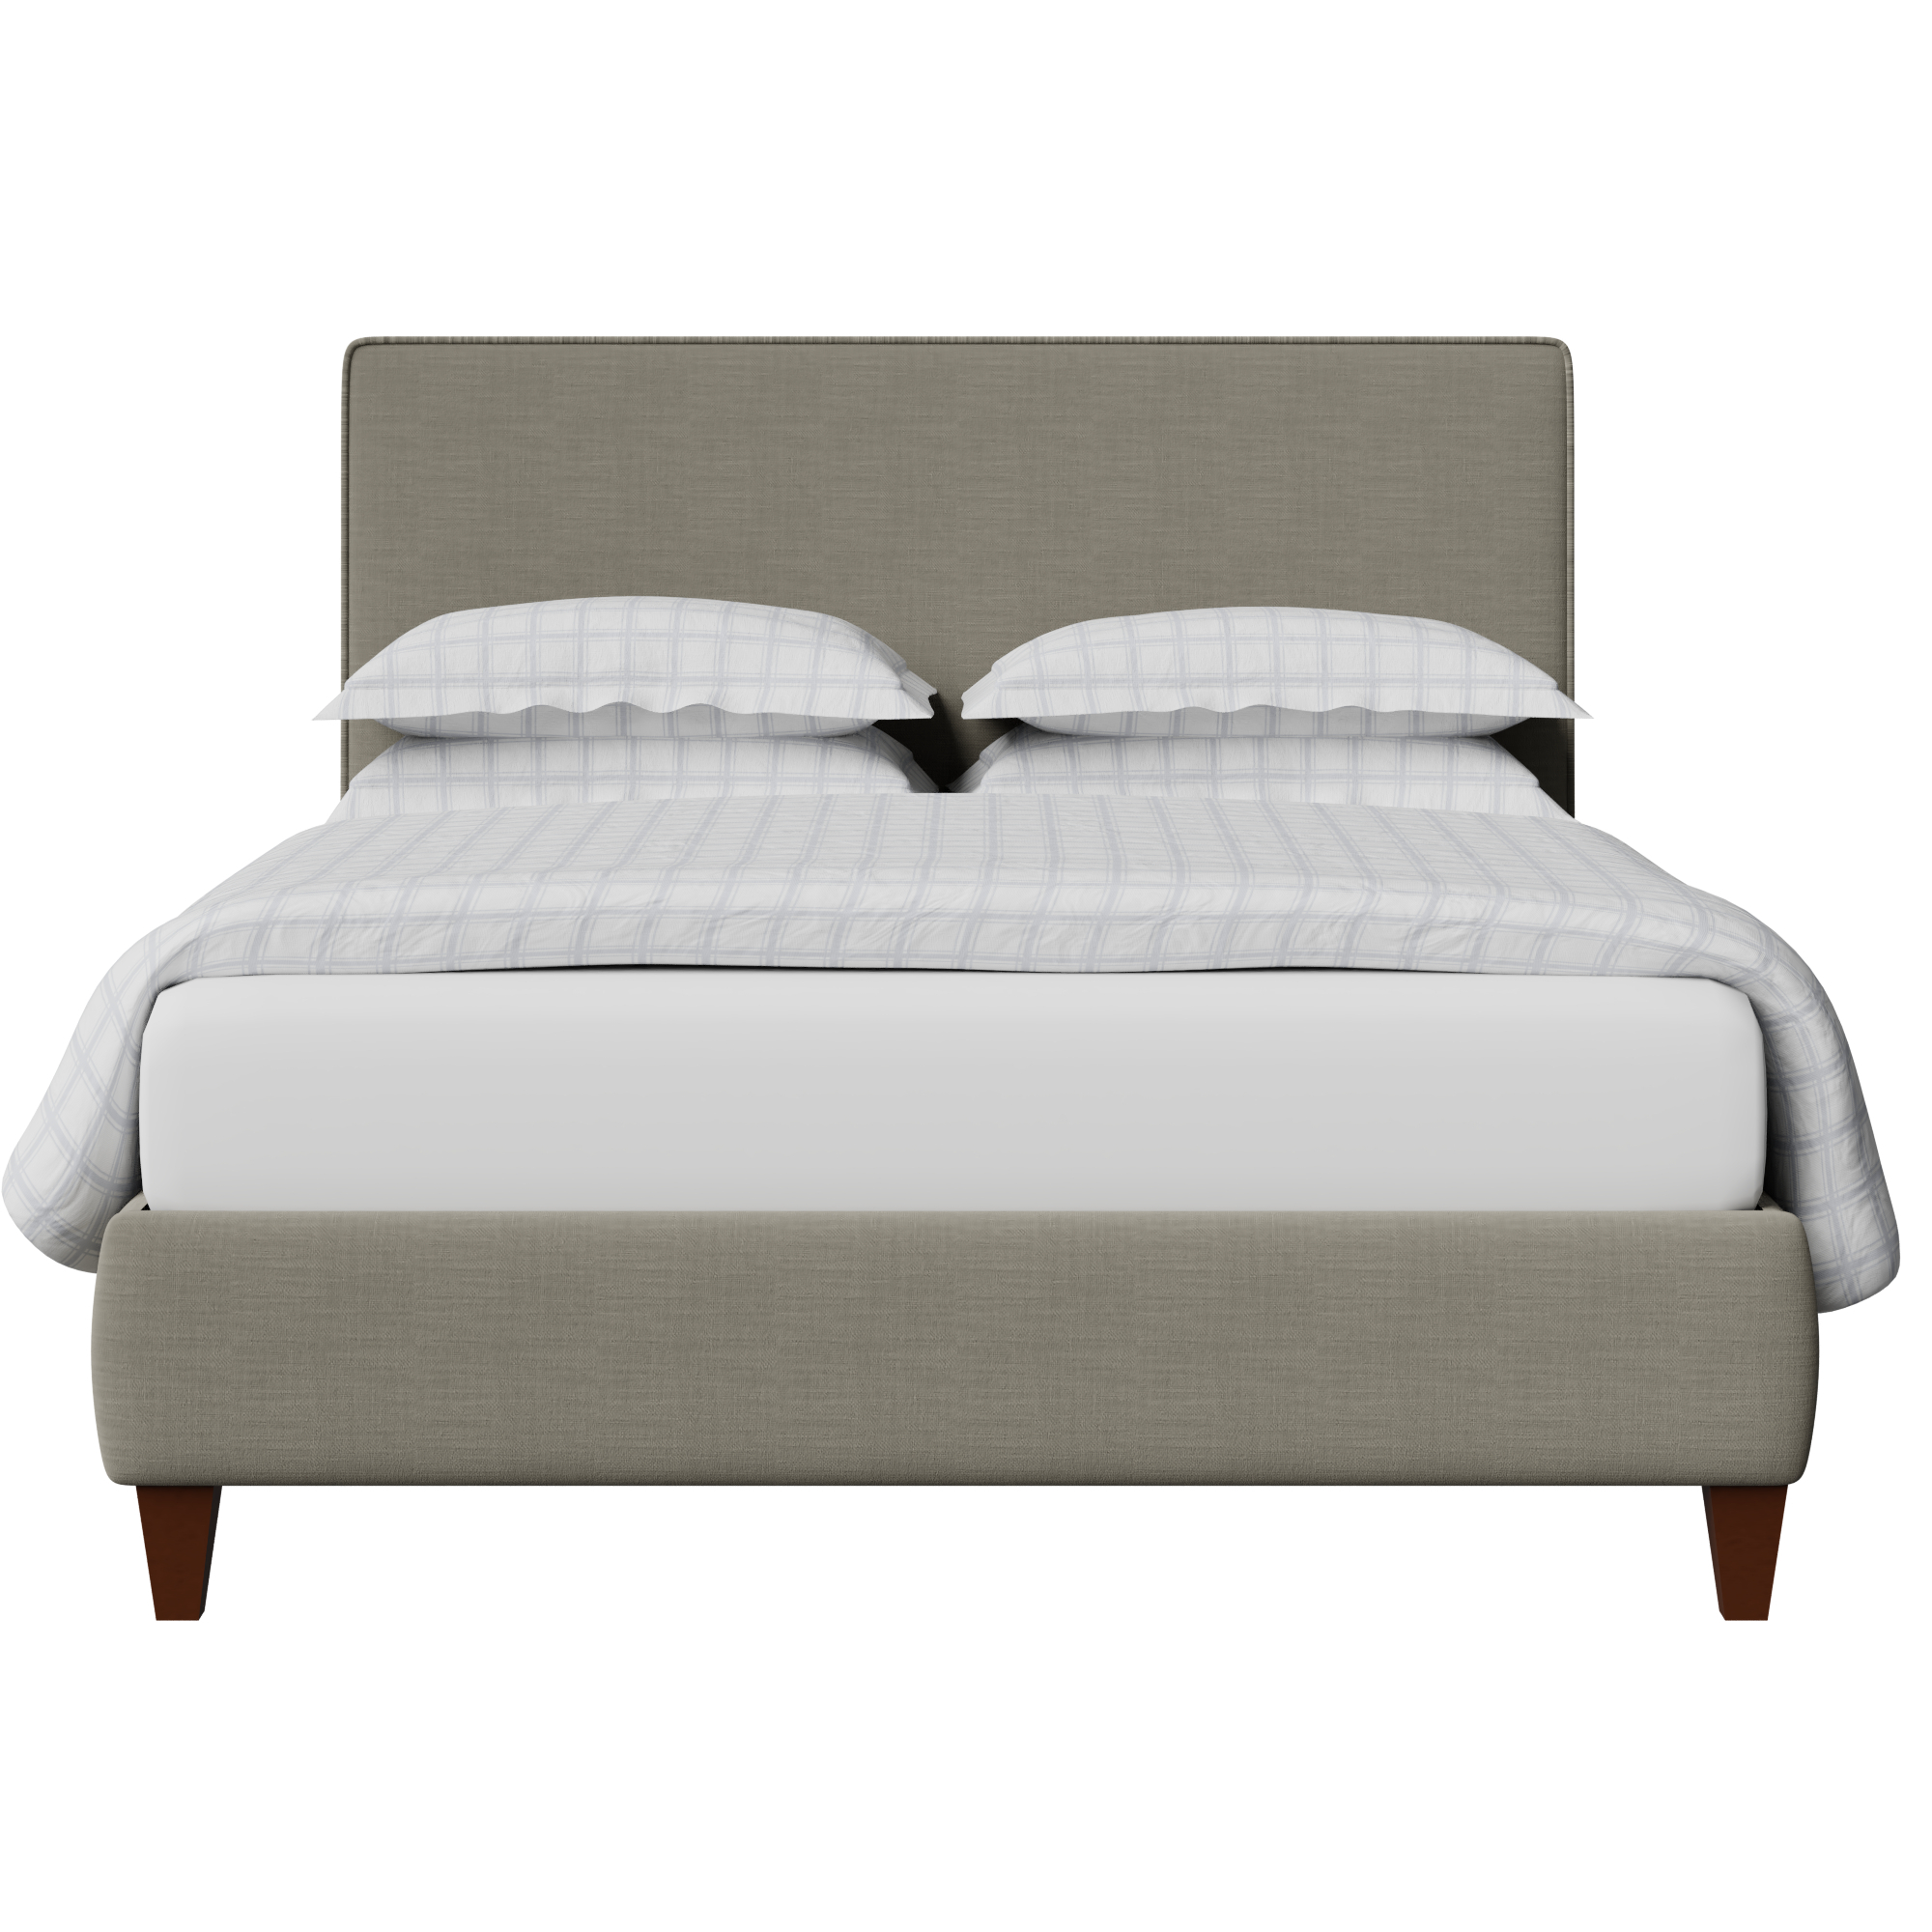 Yushan with Piping upholstered bed in grey fabric